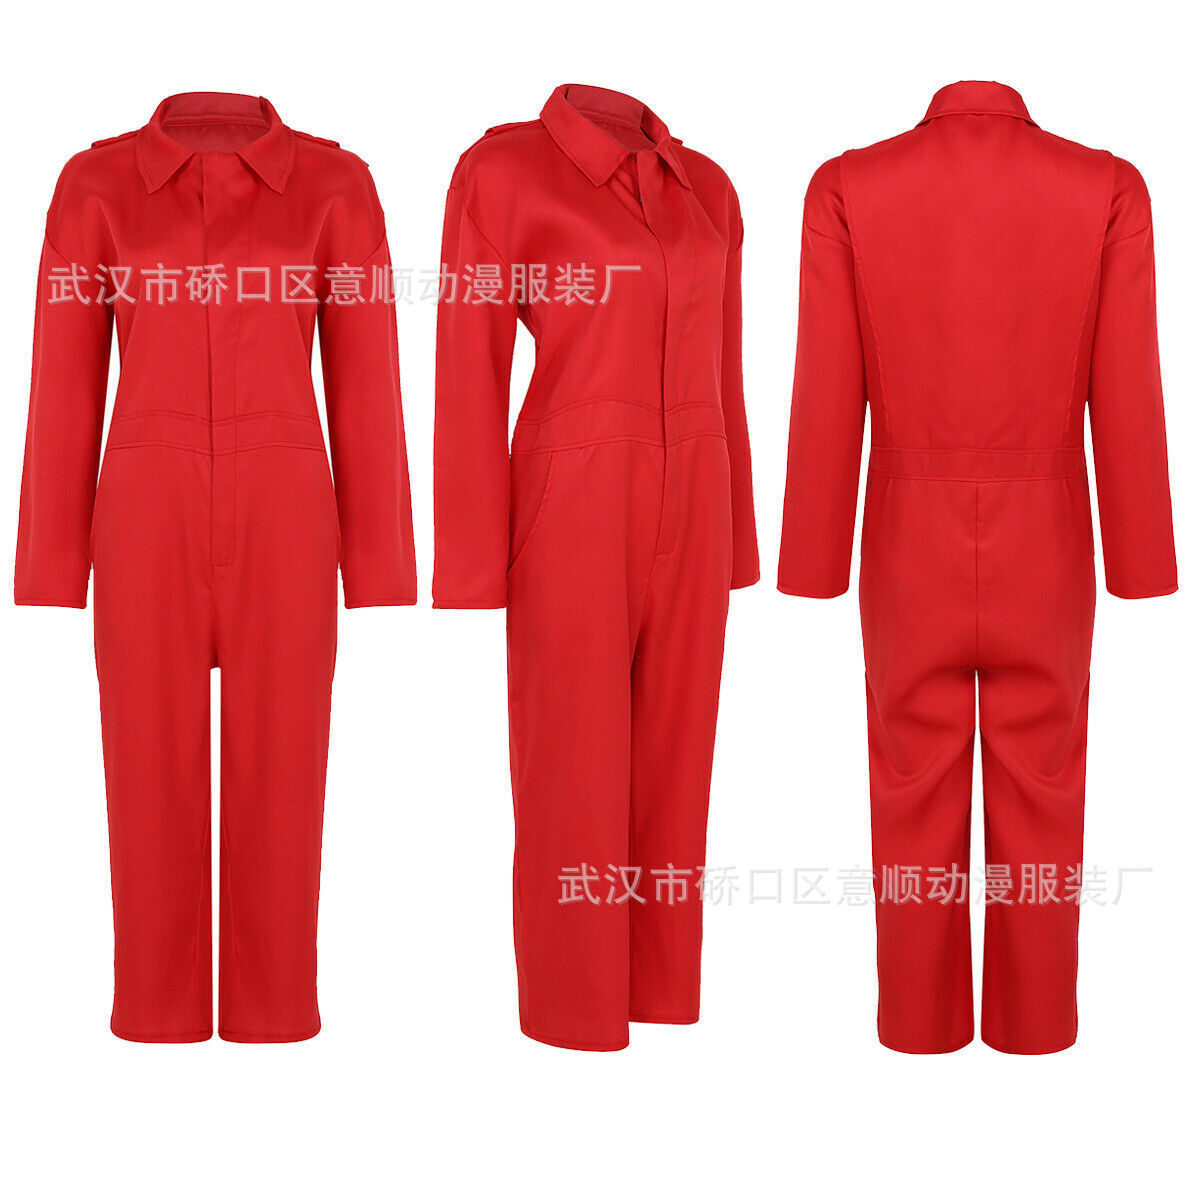 American horror film our Uscosplay costume red jumpsuit Halloween cos for men and women